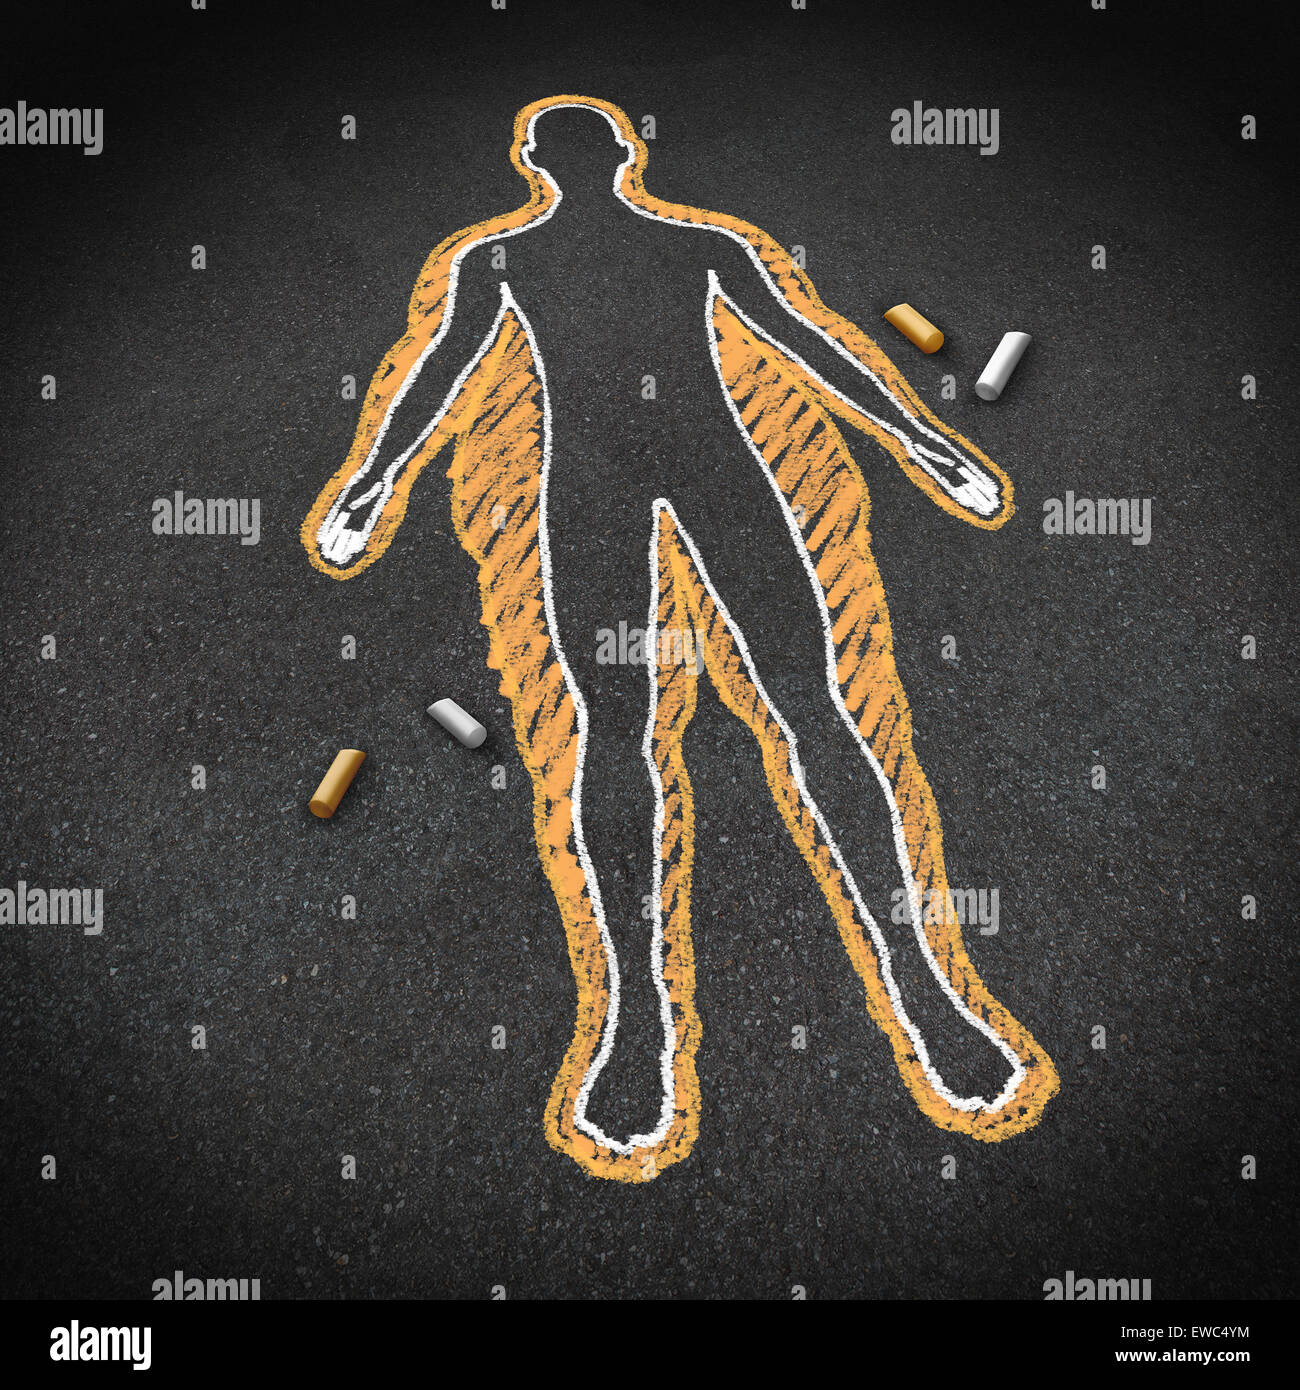 Dieting and body health concept as a chalk drawing on a road surface with an obese person and a thin one inside as a weight loss goal symbol for a healthy fitness diet and exercise lifestyle. Stock Photo